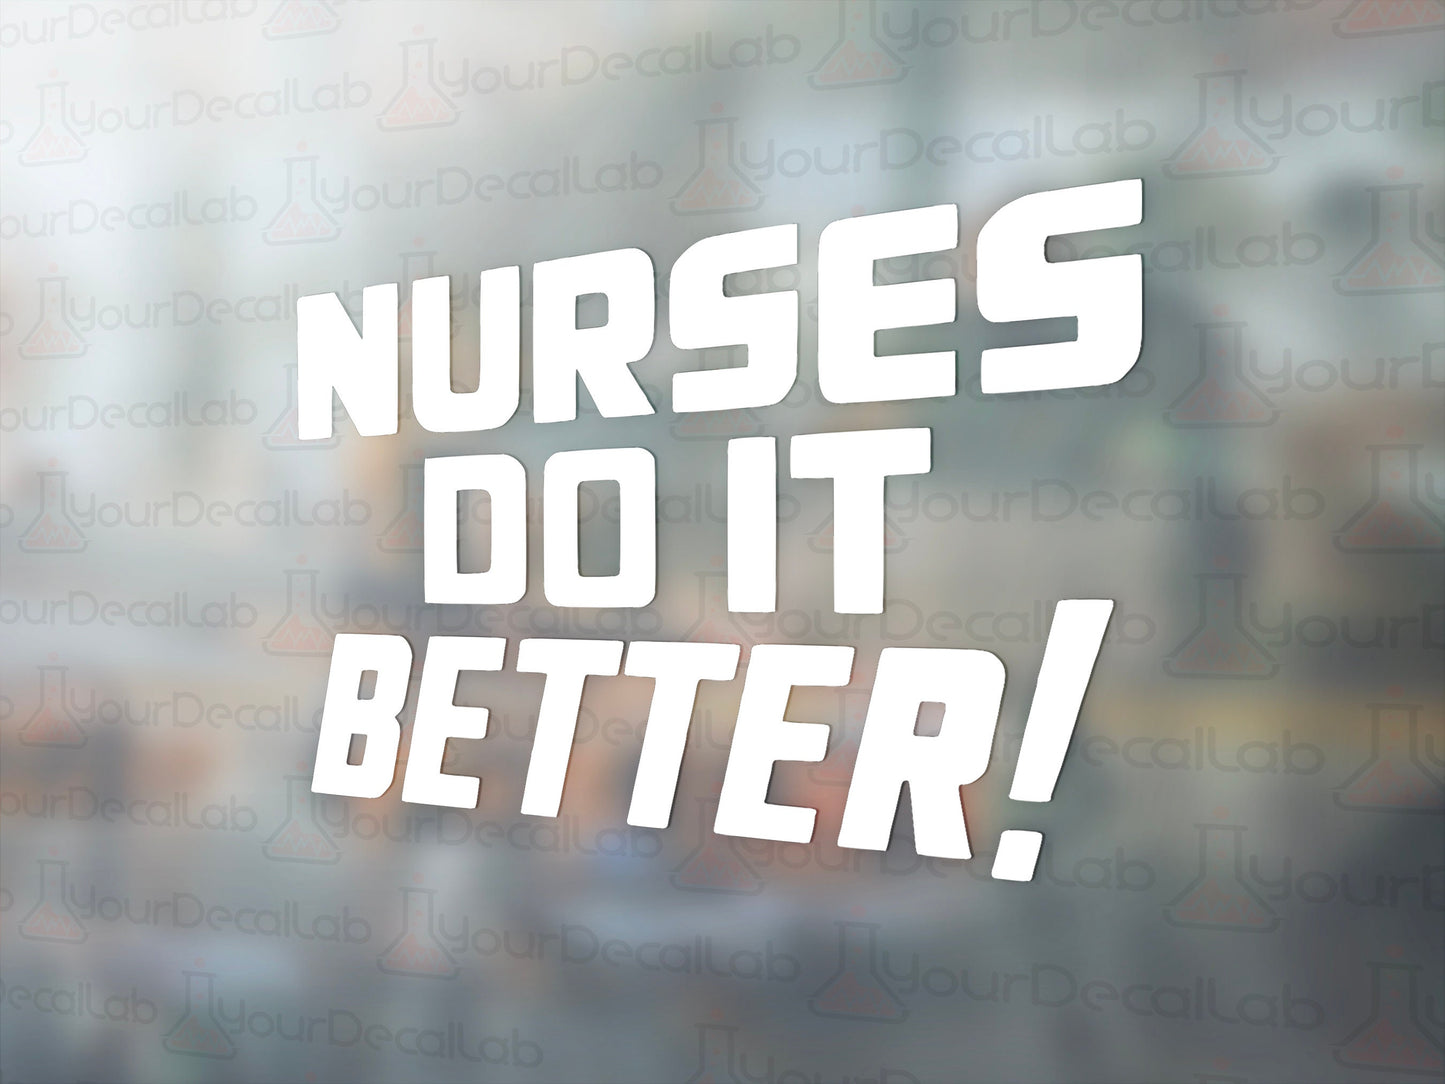 Nurses Do It Better! Decal - Many Colors & Sizes